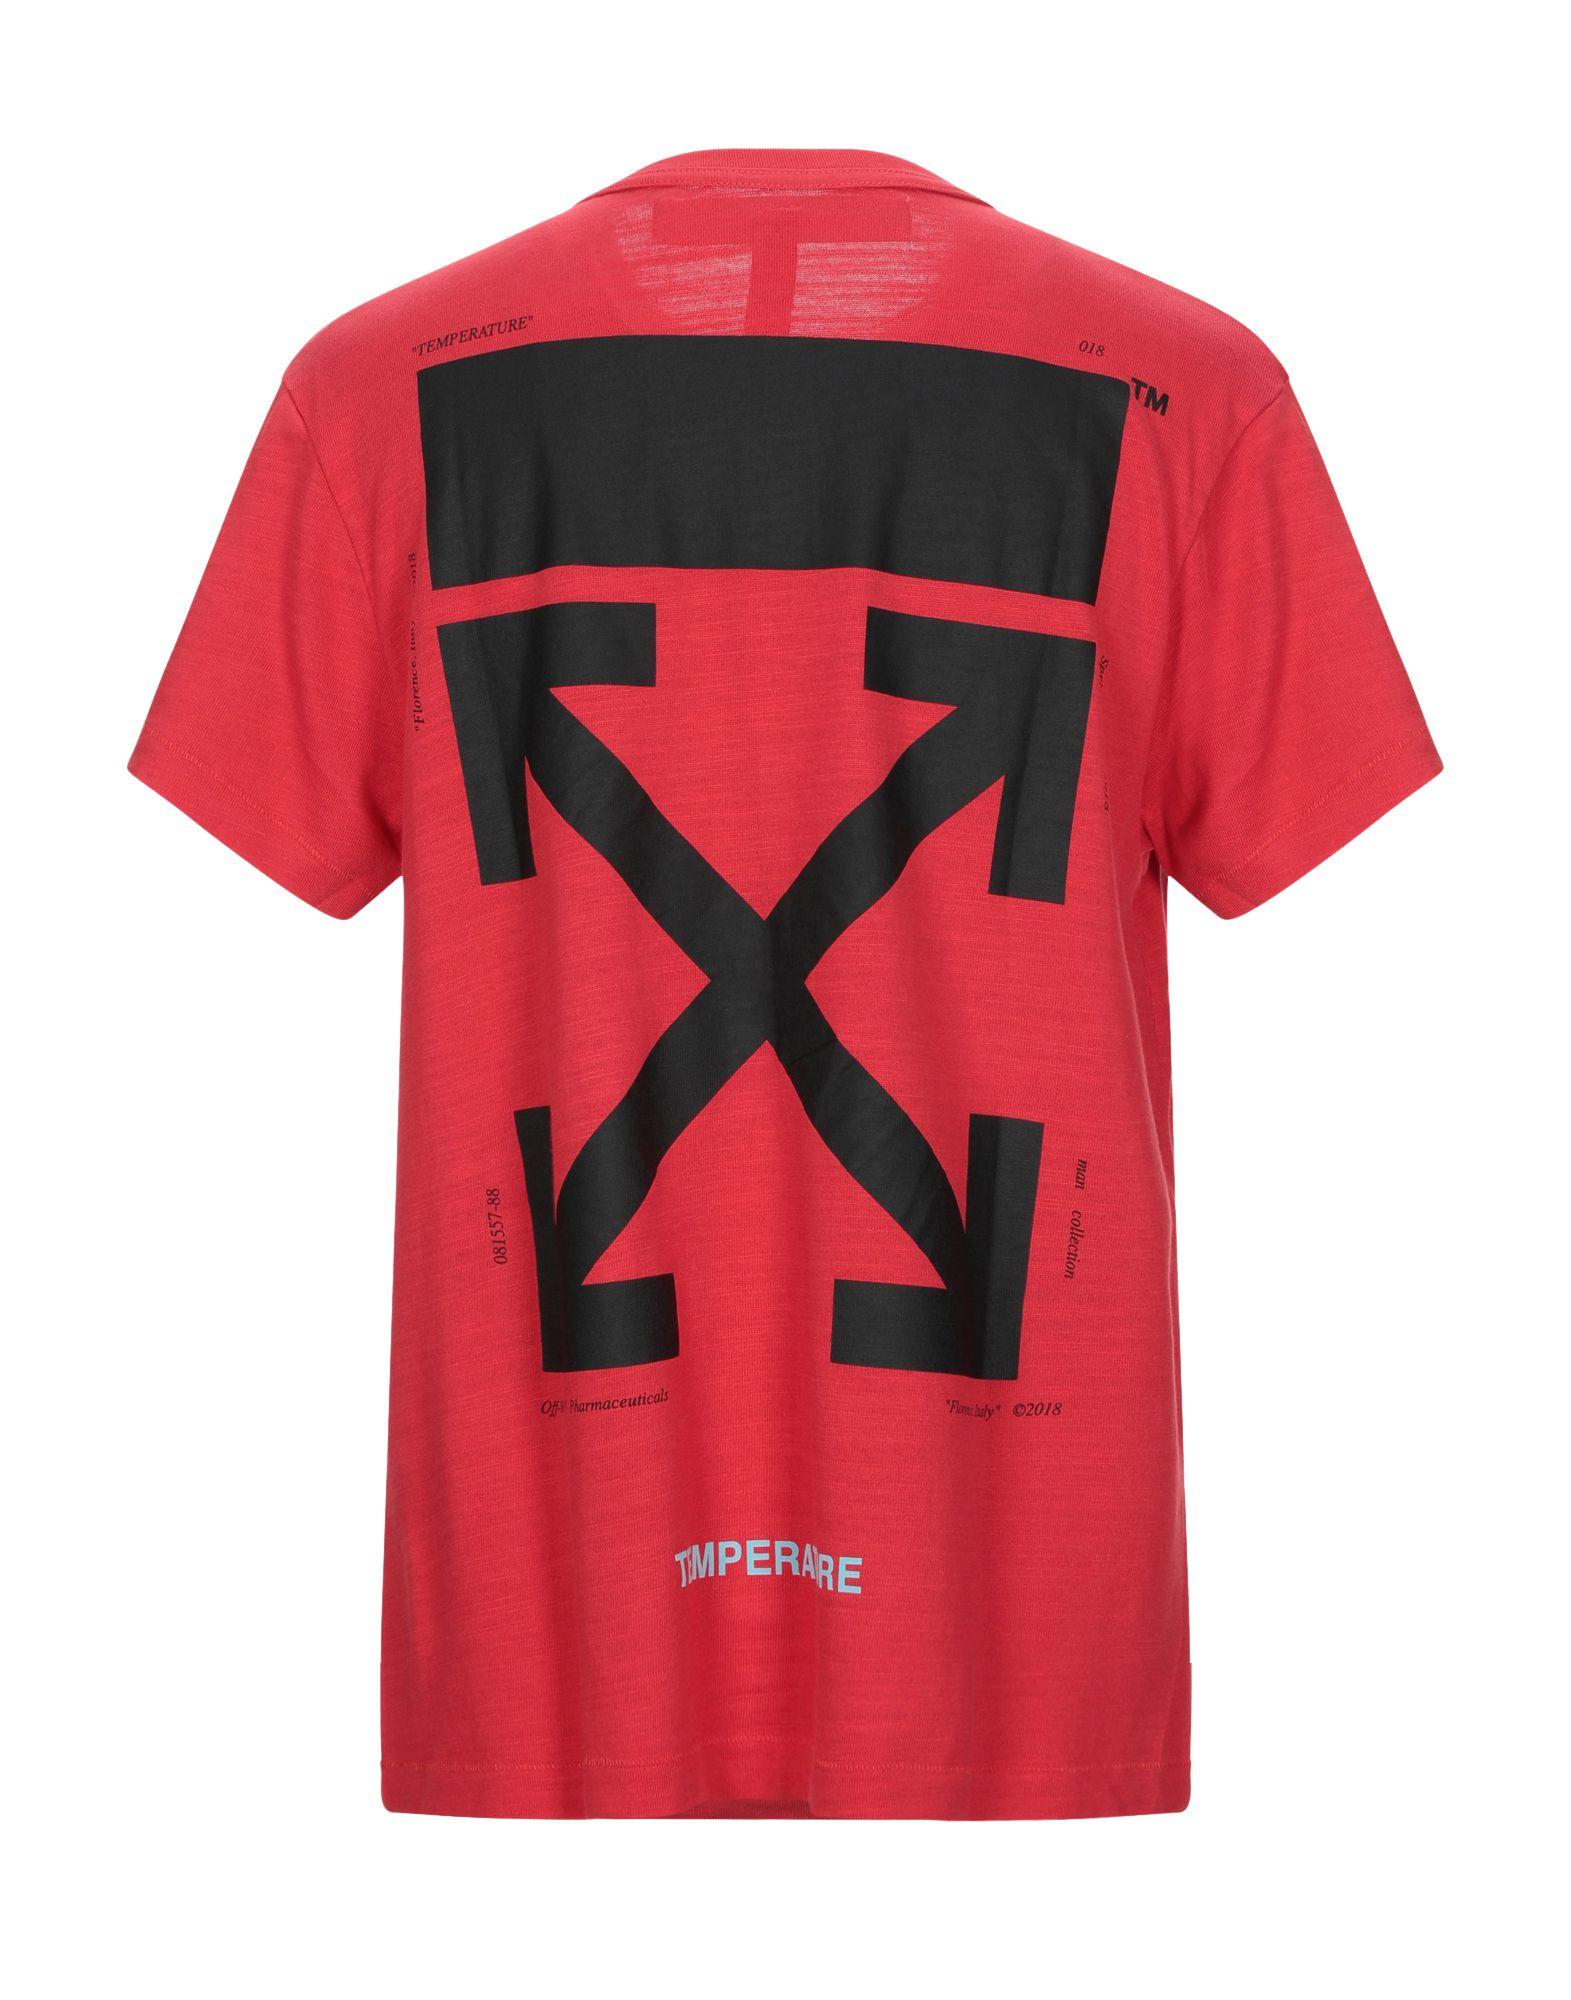 Off-White c/o Virgil Abloh Cotton T-shirt in Red for Men - Lyst